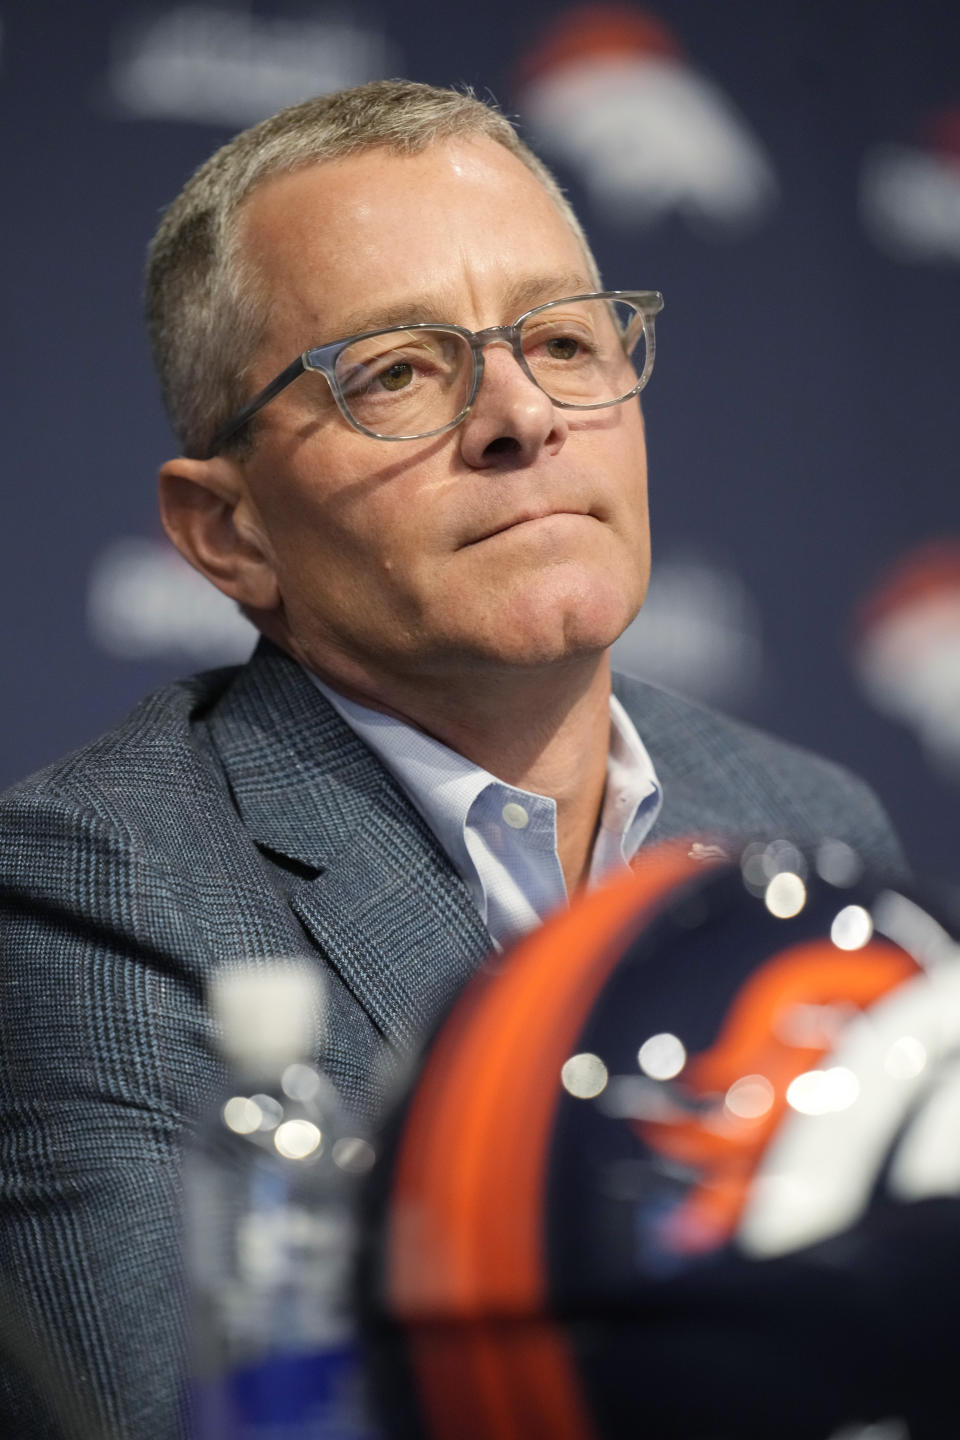 Denver Broncos chief executive officer Greg Penner responds to a question during a news conference about the firing of head coach Nathaniel Hackett Tuesday, Dec. 27, 2022, in Englewood, Colo. (AP Photo/David Zalubowski)